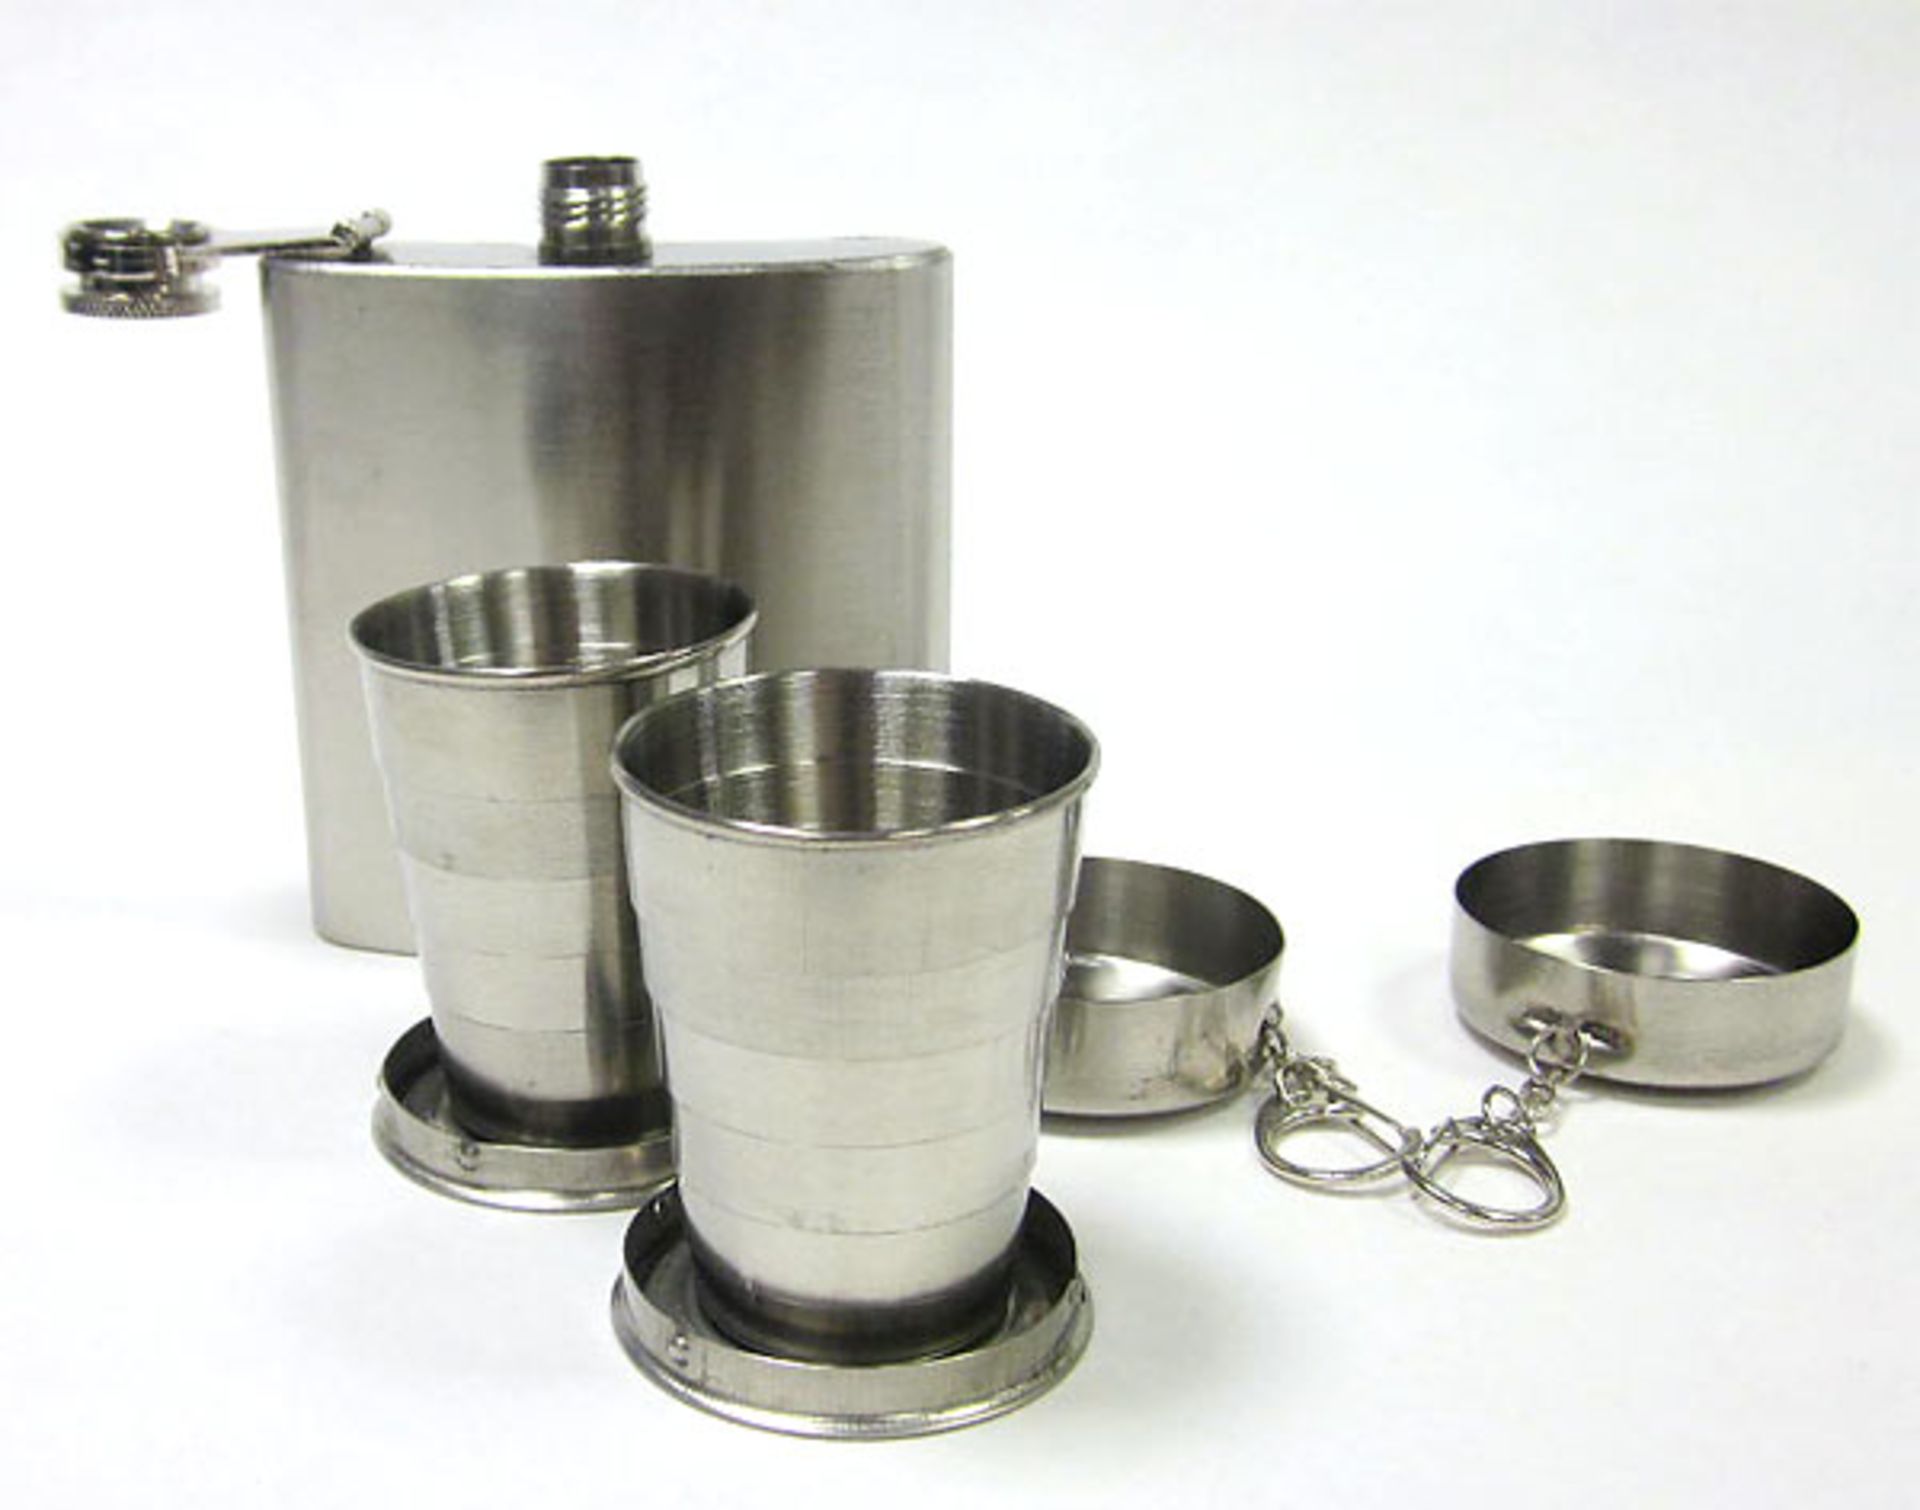 V *TRADE QTY* Brand New Stainless Steel Hip Flask And Cup Set X 10 YOUR BID PRICE TO BE MULTIPLIED